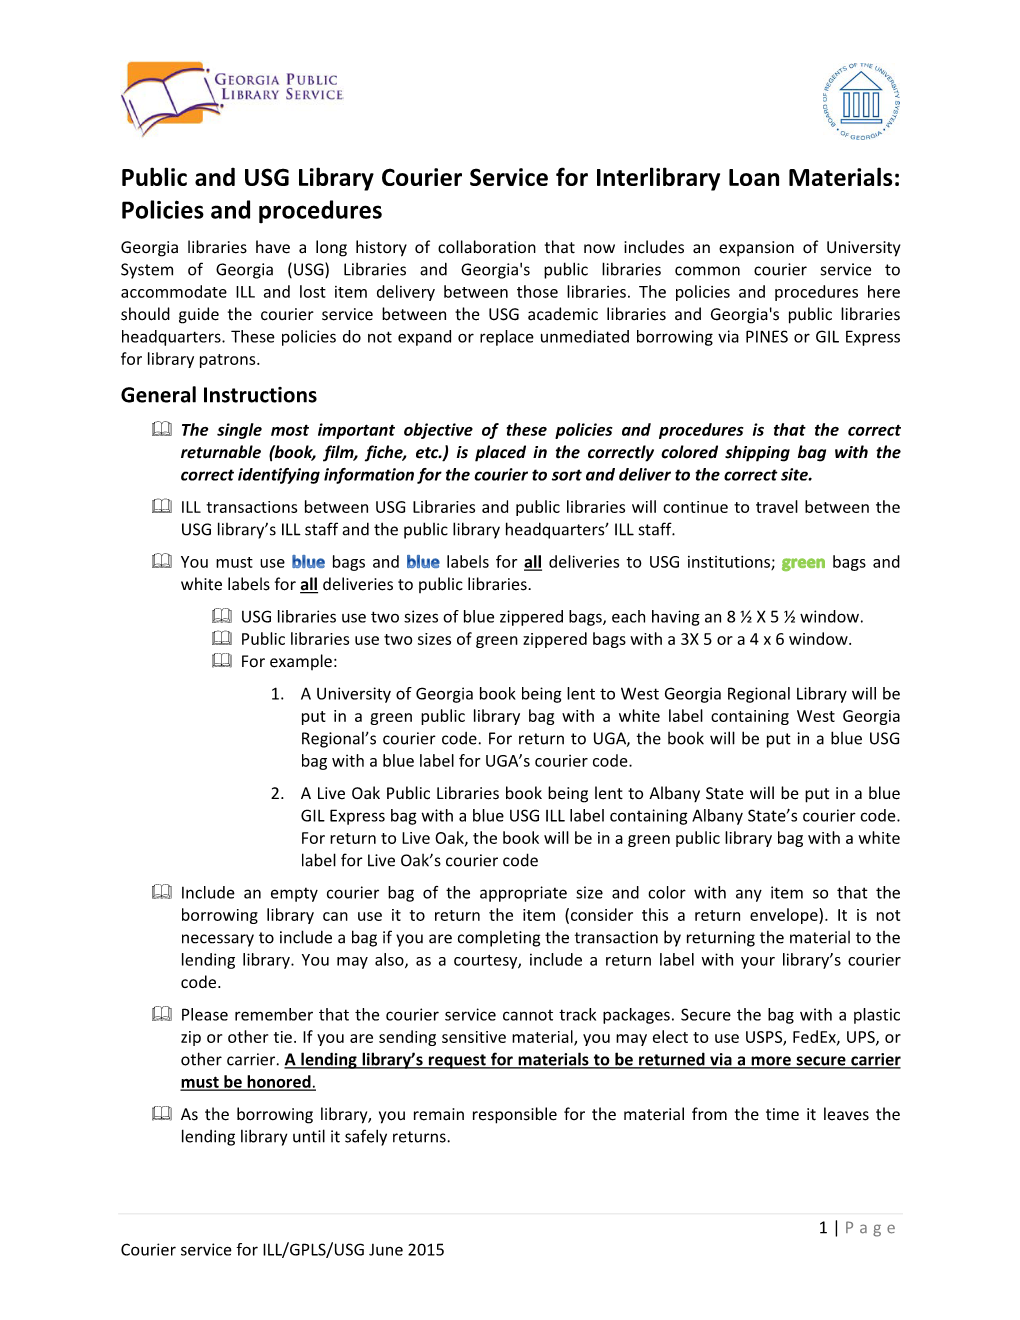 Public and USG Library Courier Service for Interlibrary Loan